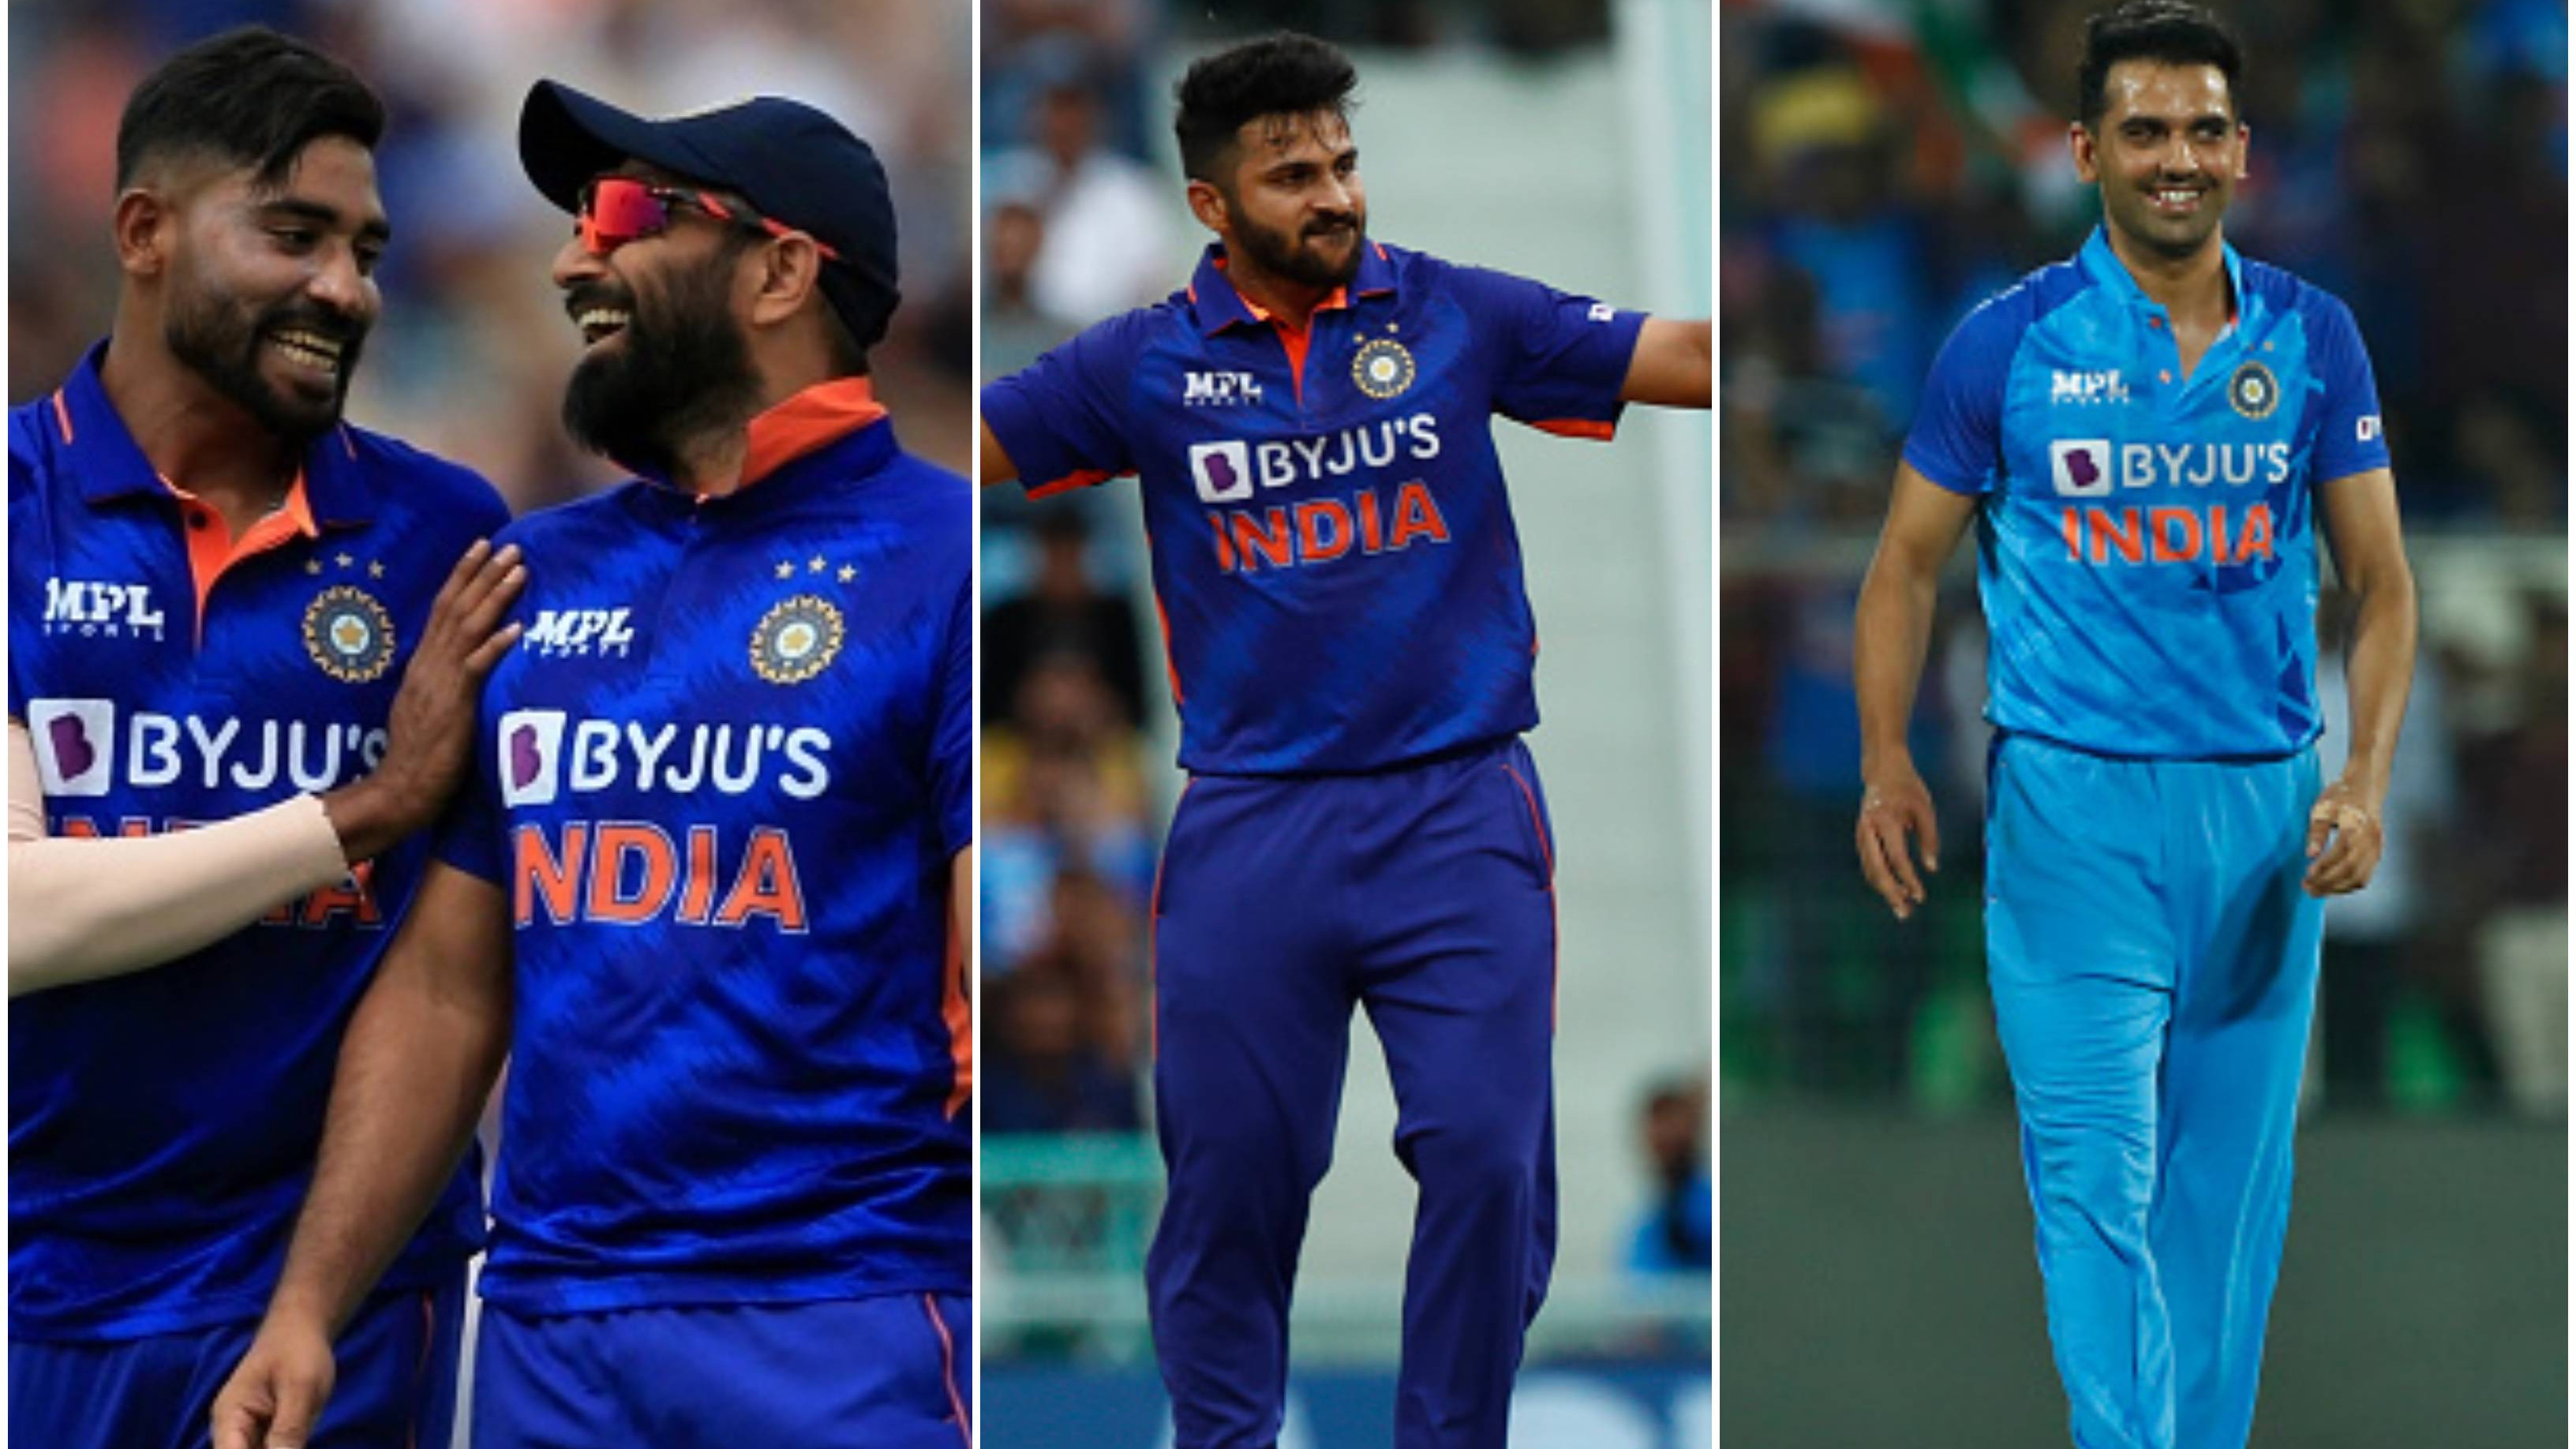 T20 World Cup 2022: Shami, Siraj and Shardul set to depart for Australia; Deepak Chahar ruled out – Report